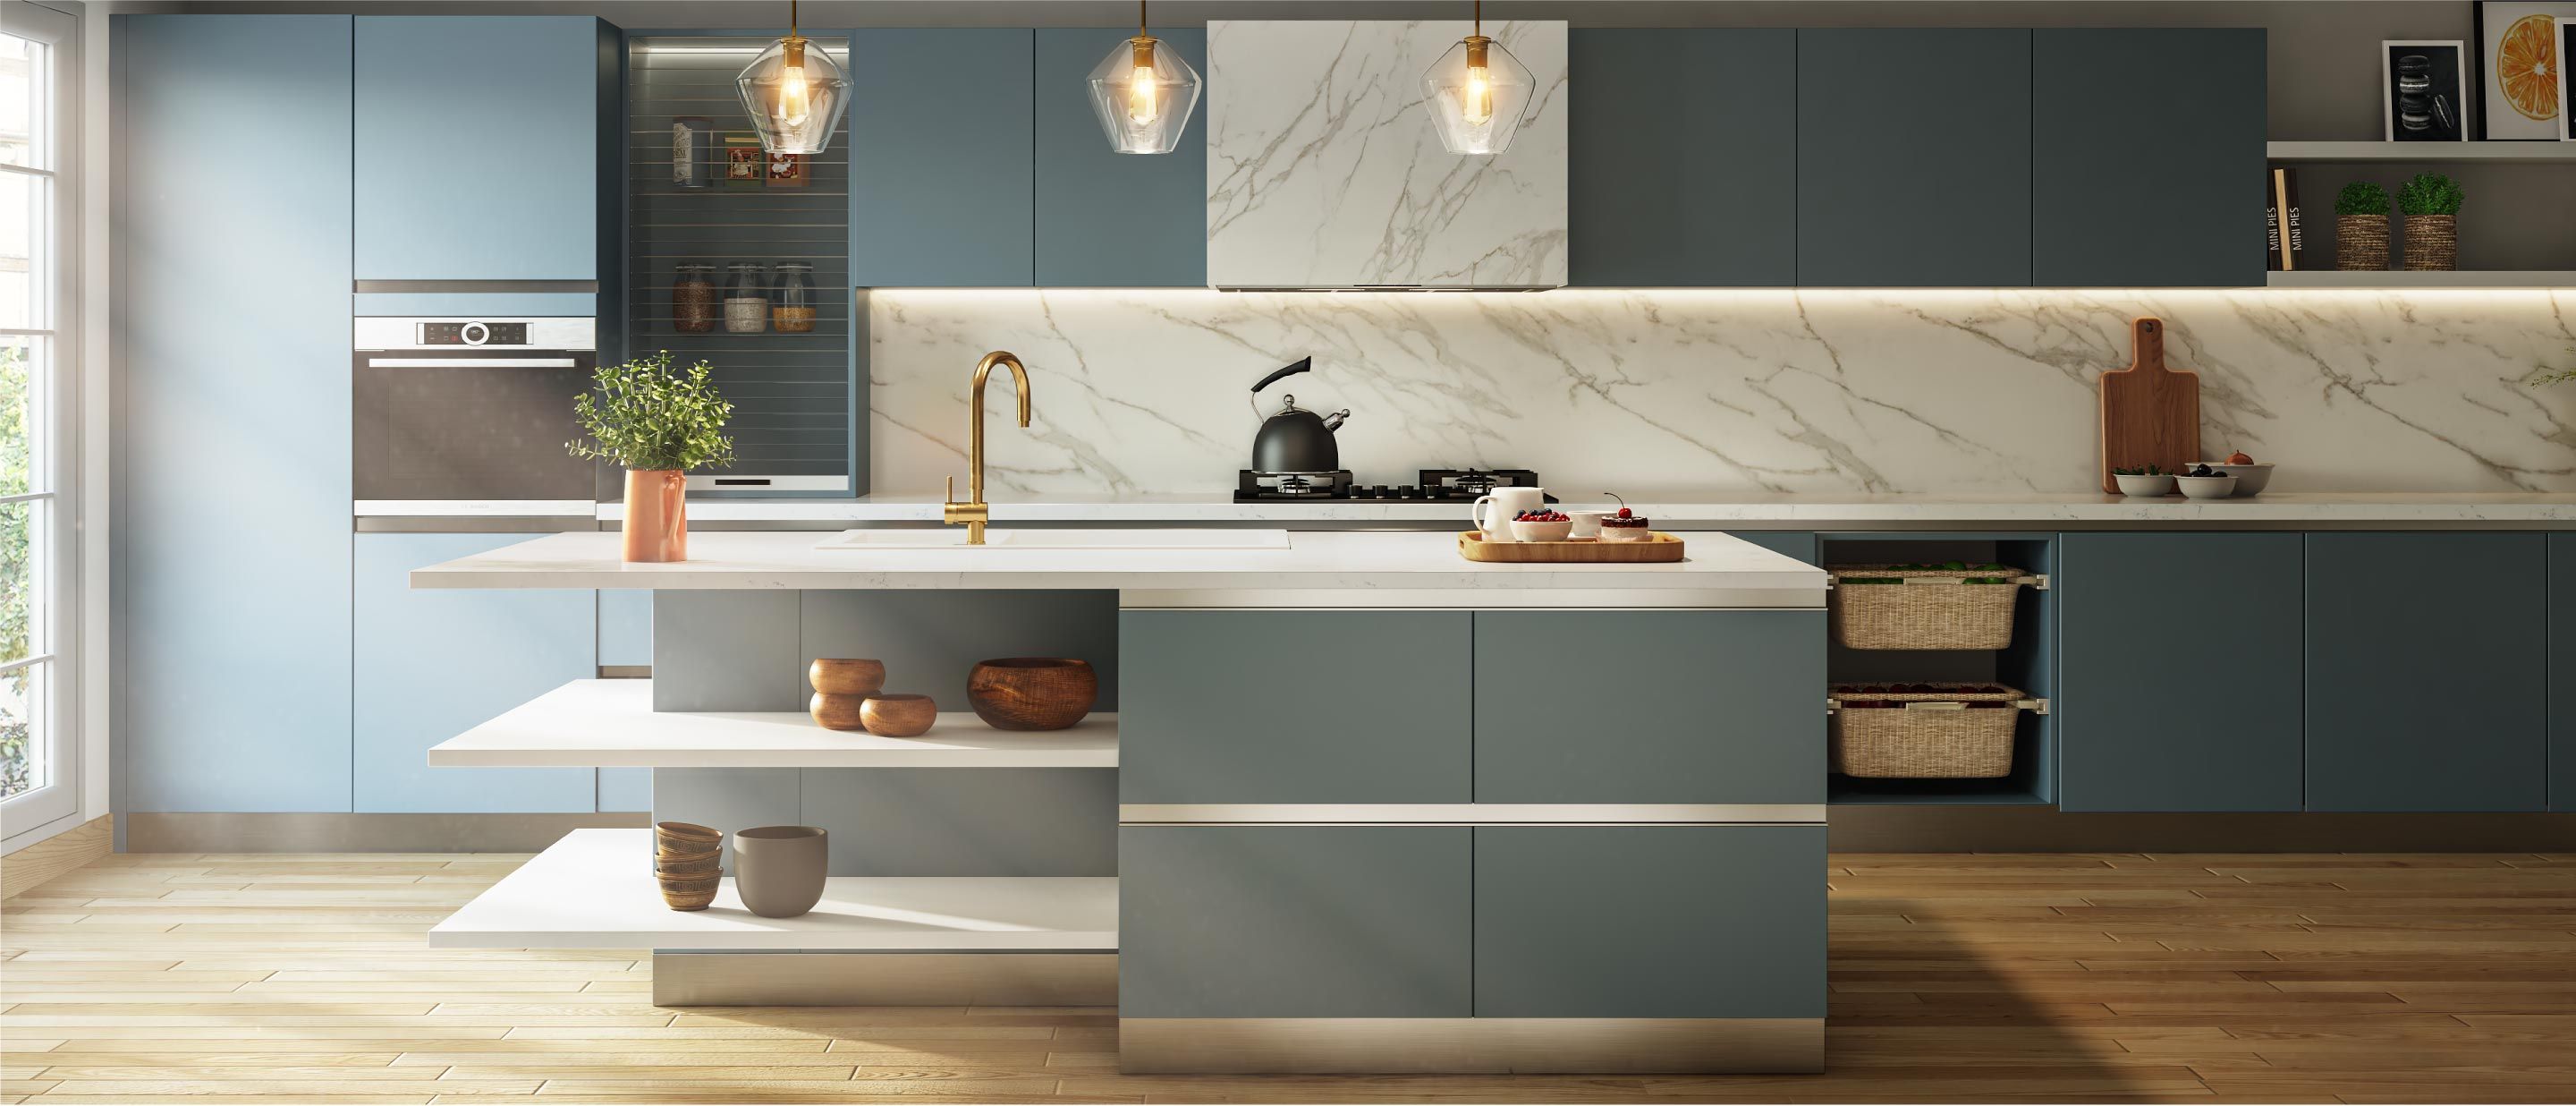 Modular kitchens designed with science and sensibility